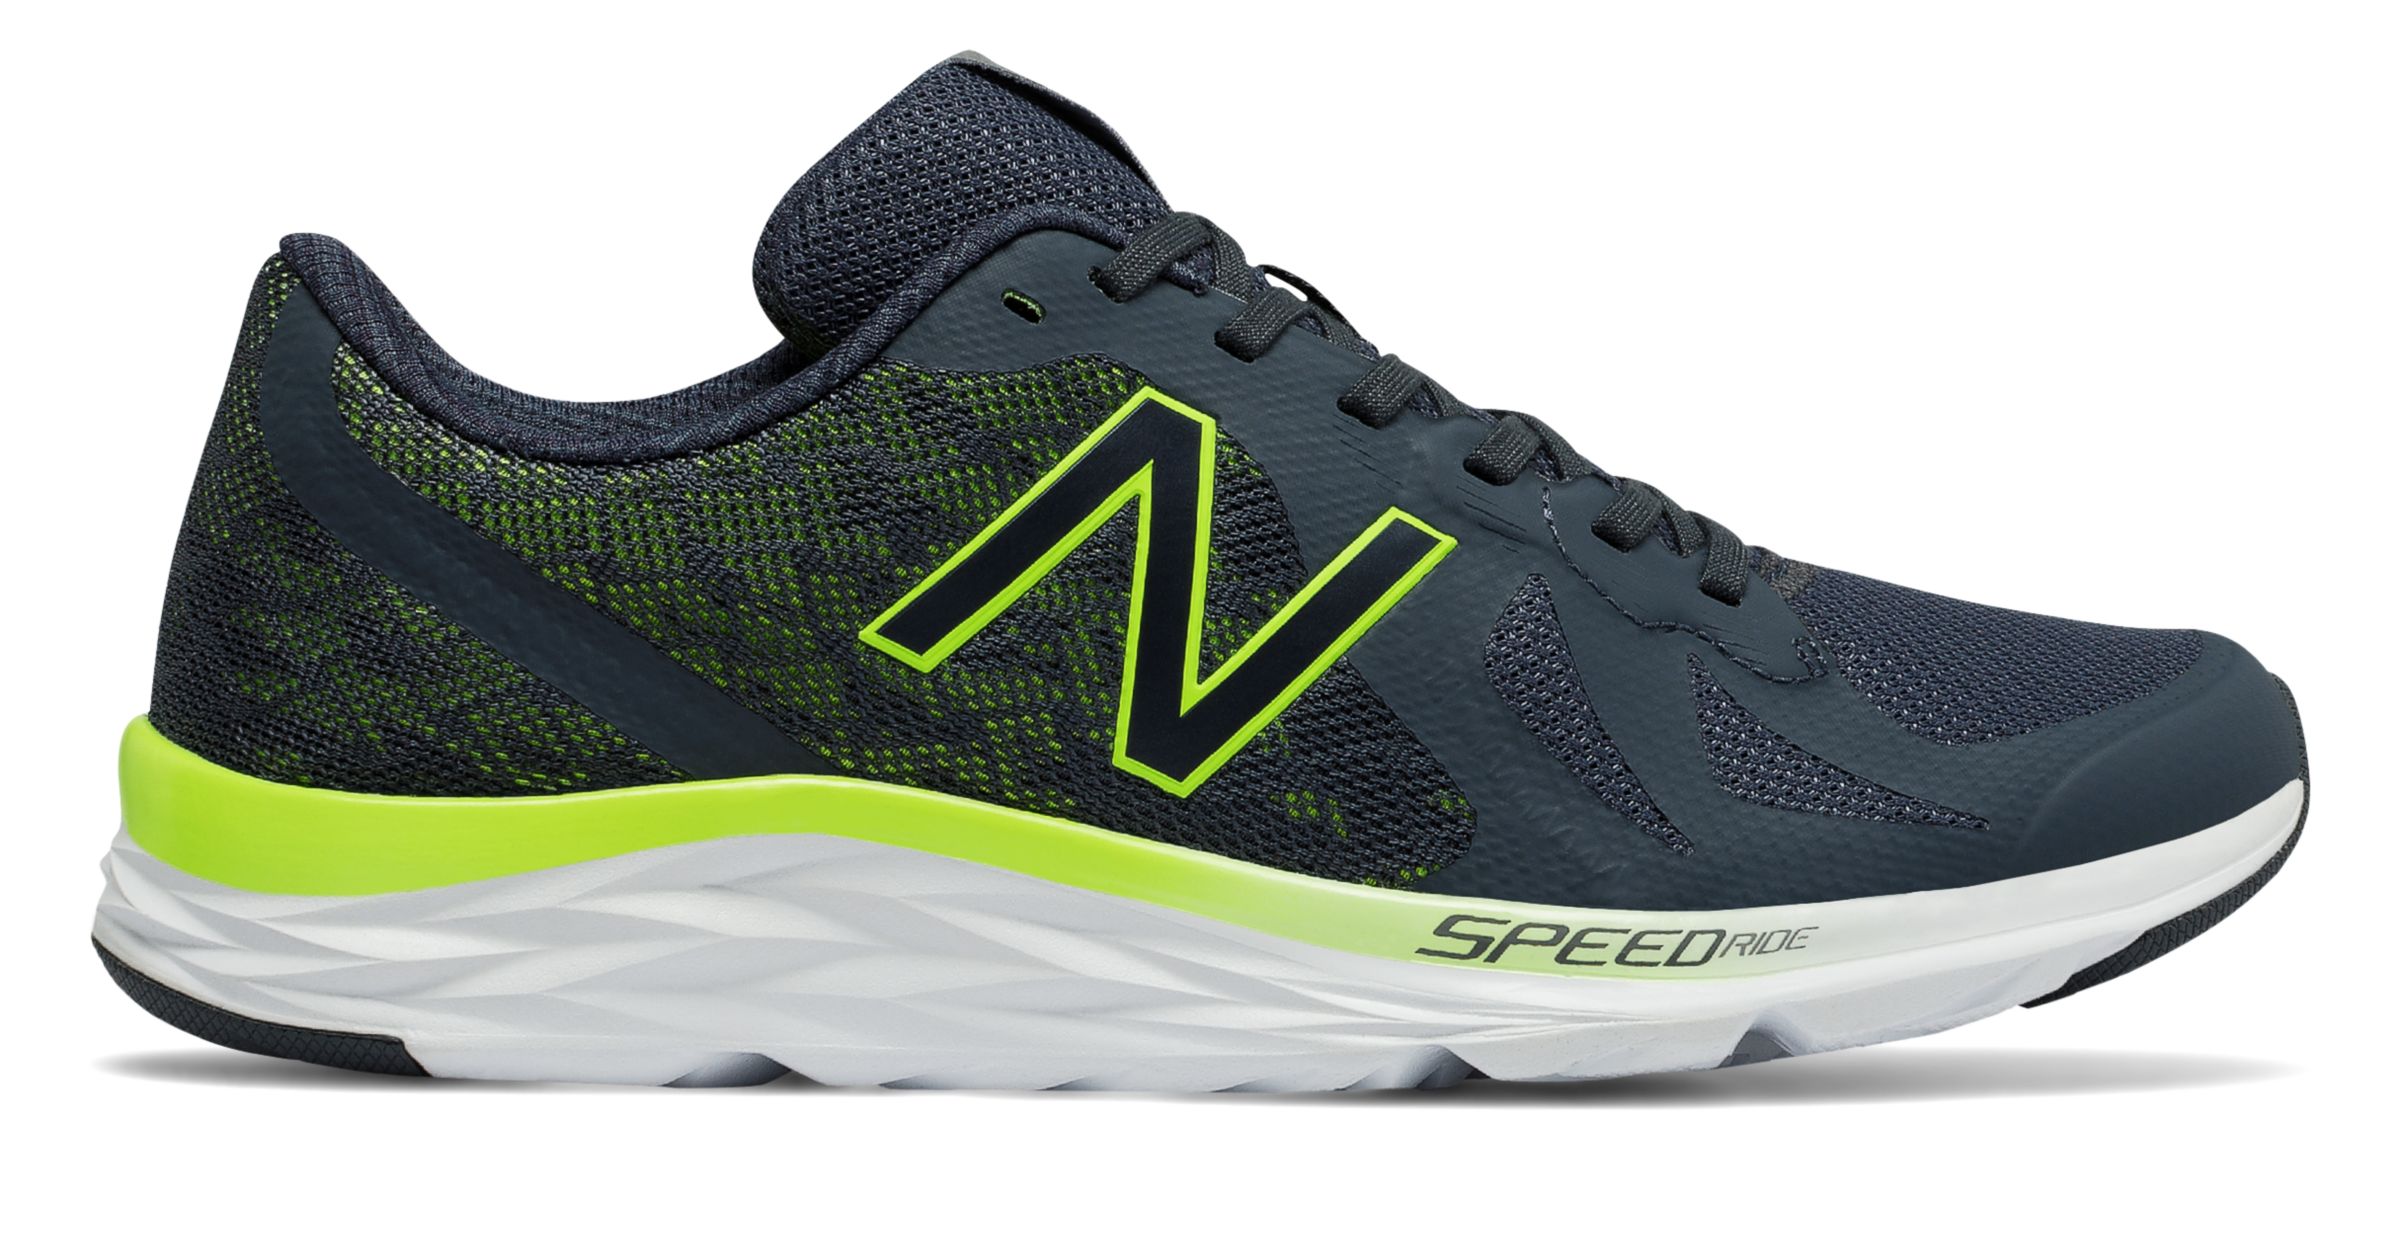 New Balance M790-V6 on Sale - Discounts Up to 20% Off on M790RG6 at Joe's New  Balance Outlet